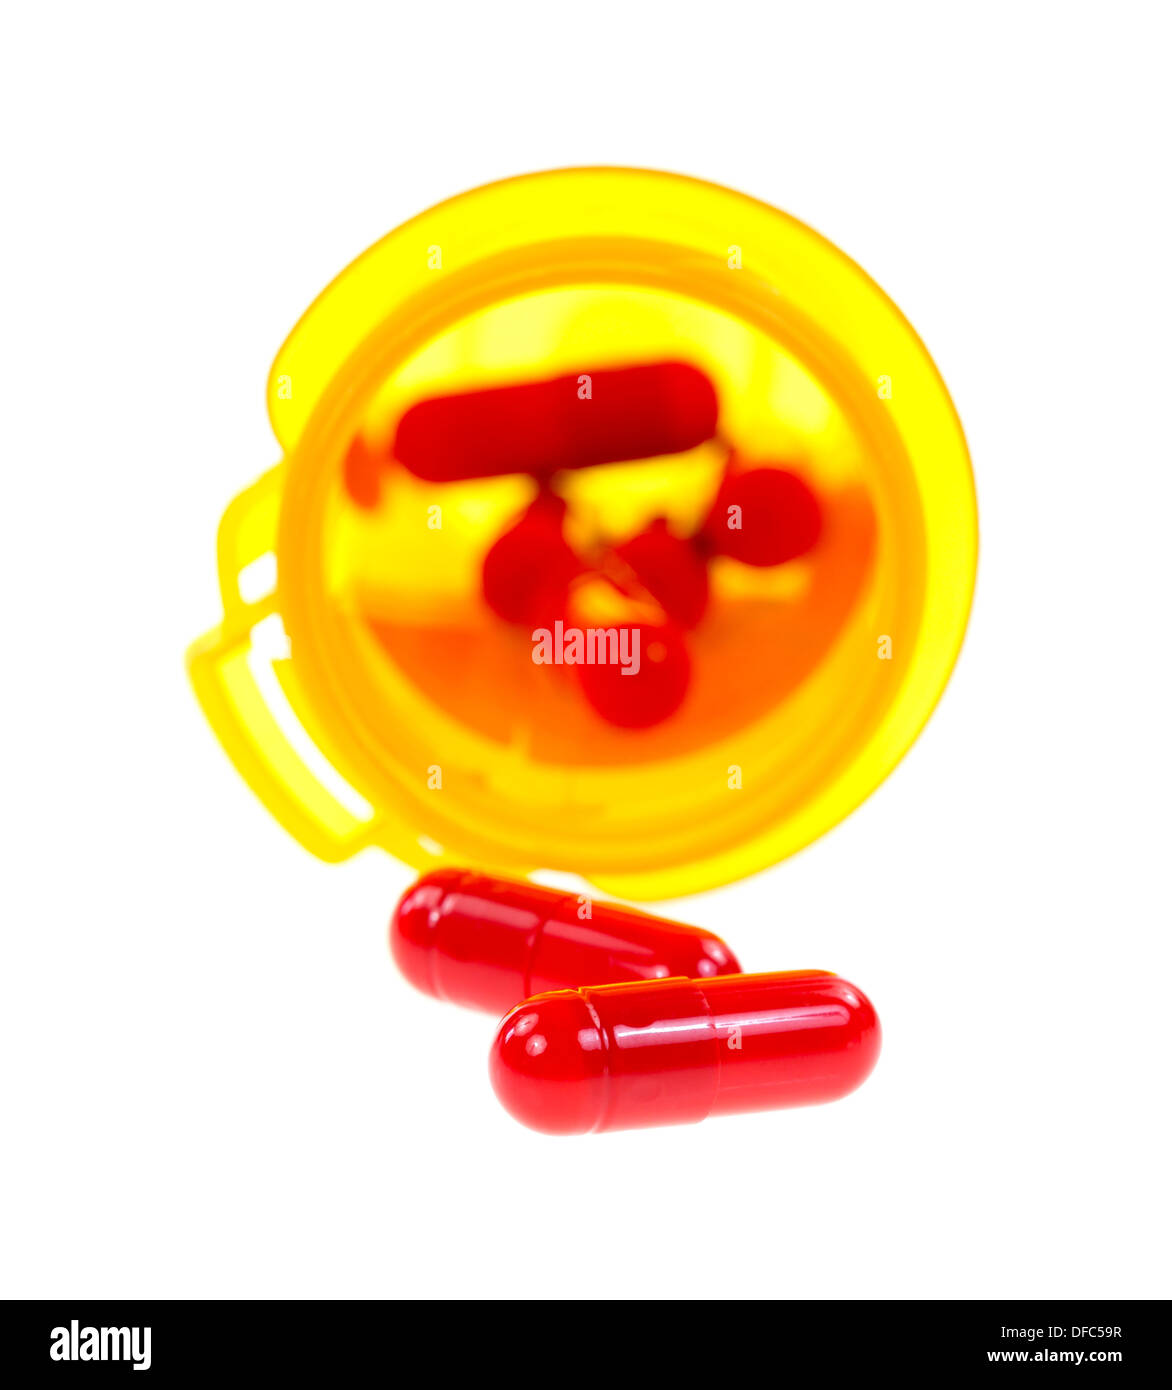 Two antibiotic capsules in front of a yellow medicine bottle with the remainder of the dosage in the bottle. Stock Photo